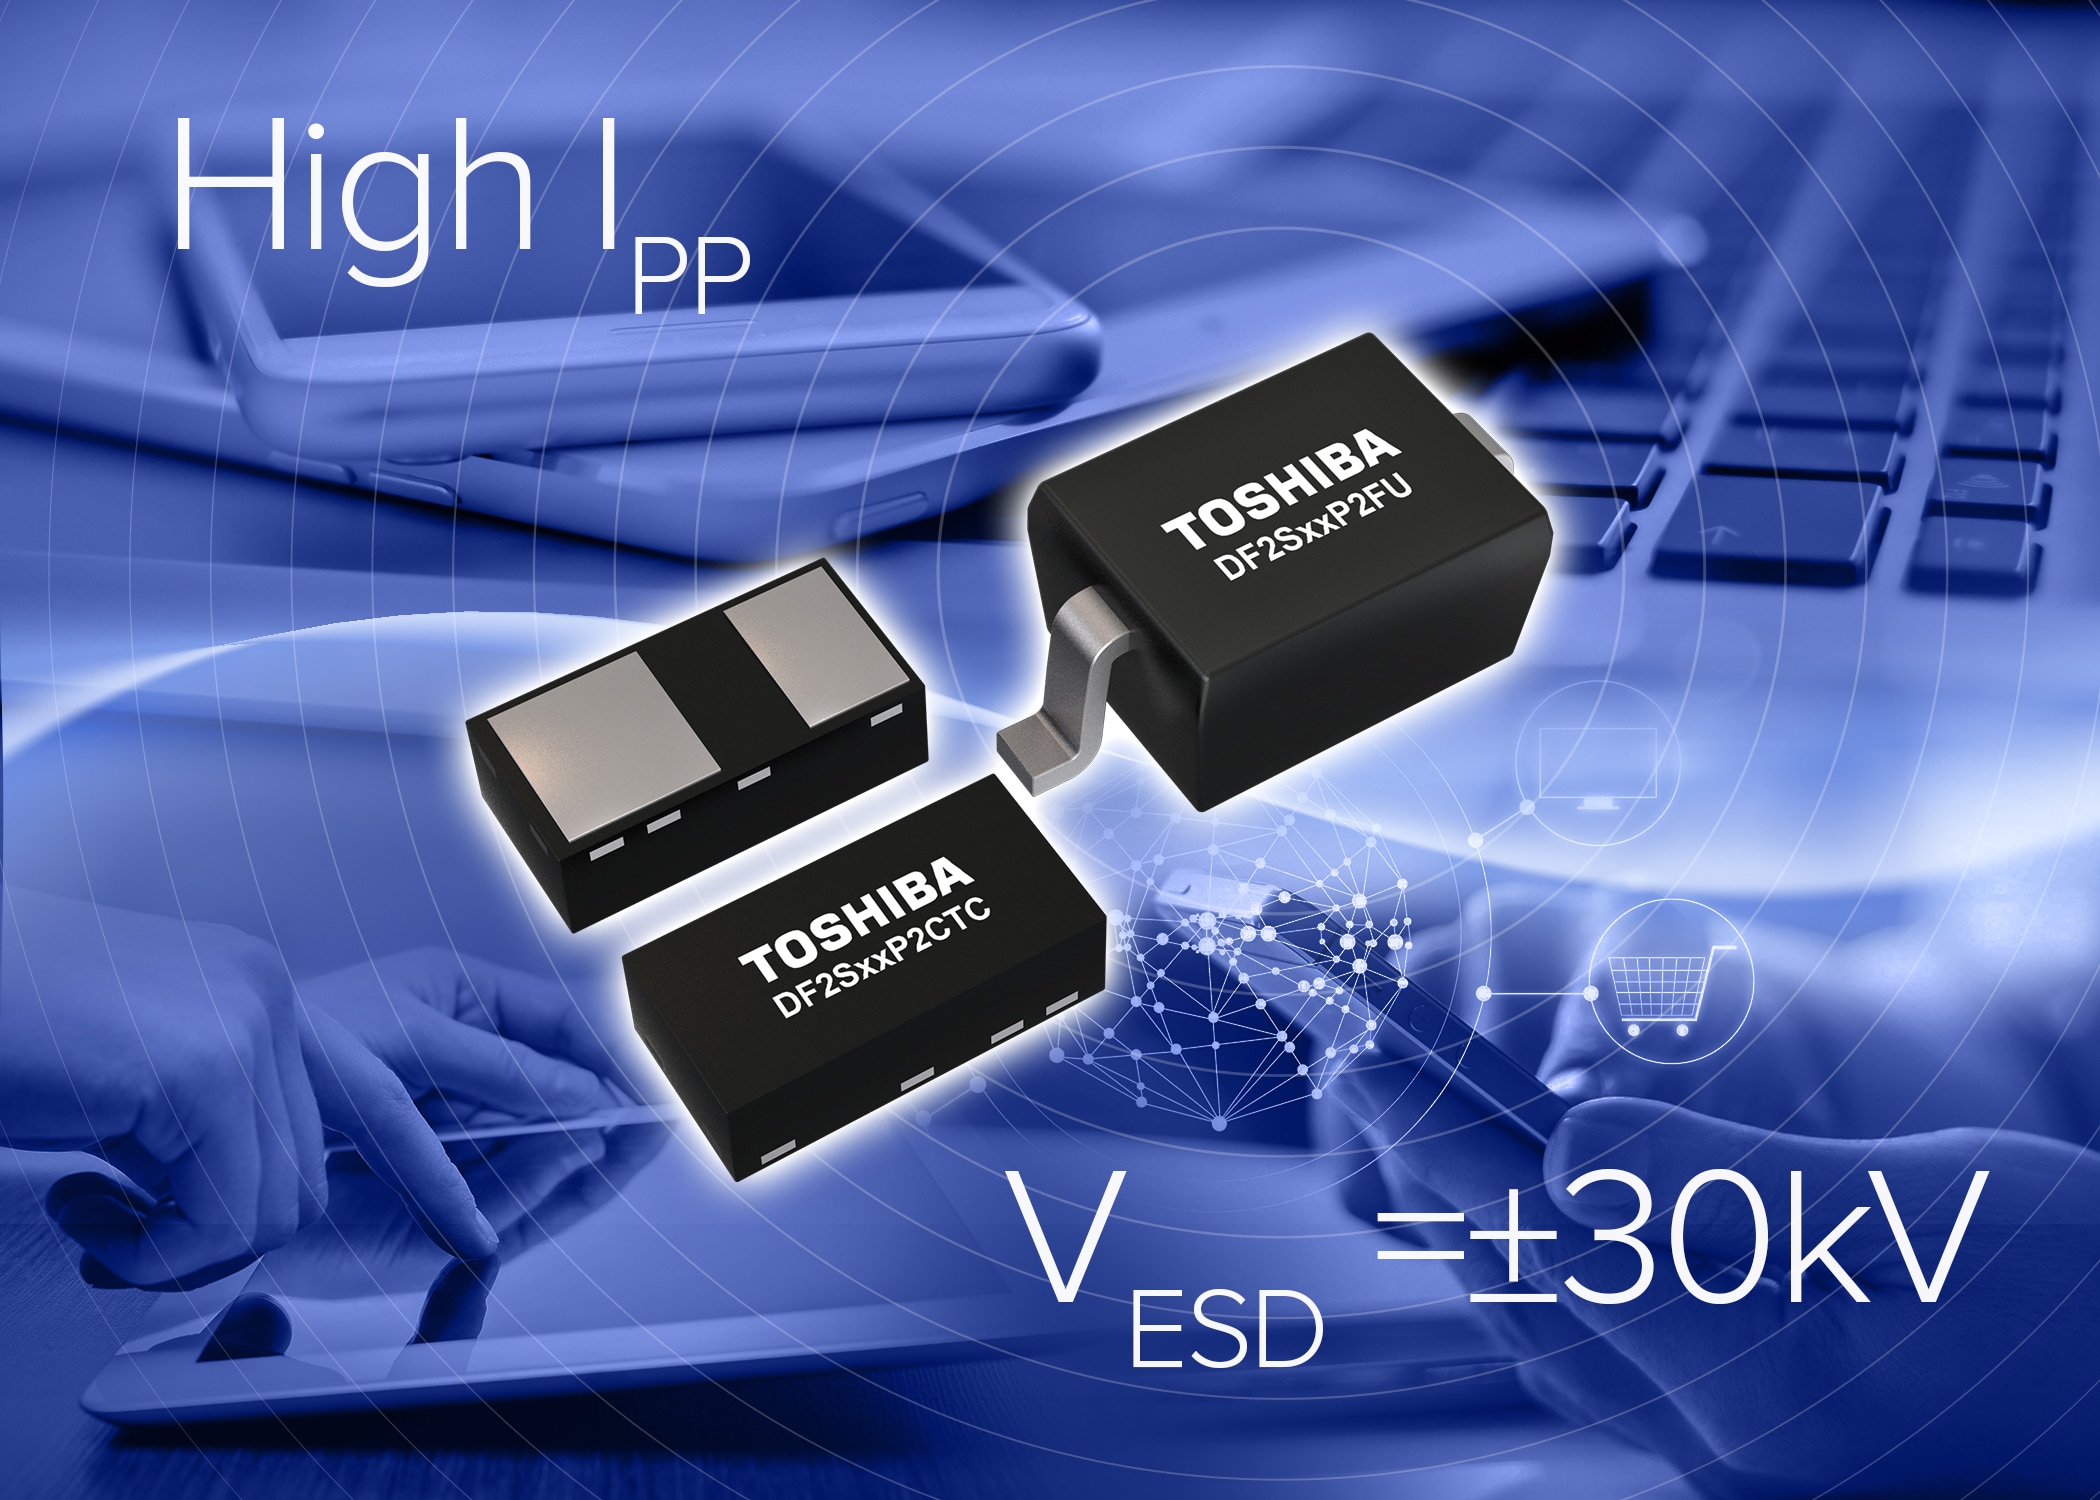 Toshiba Launches High Peak Pulse Current TVS Diodes for Power Line Protection